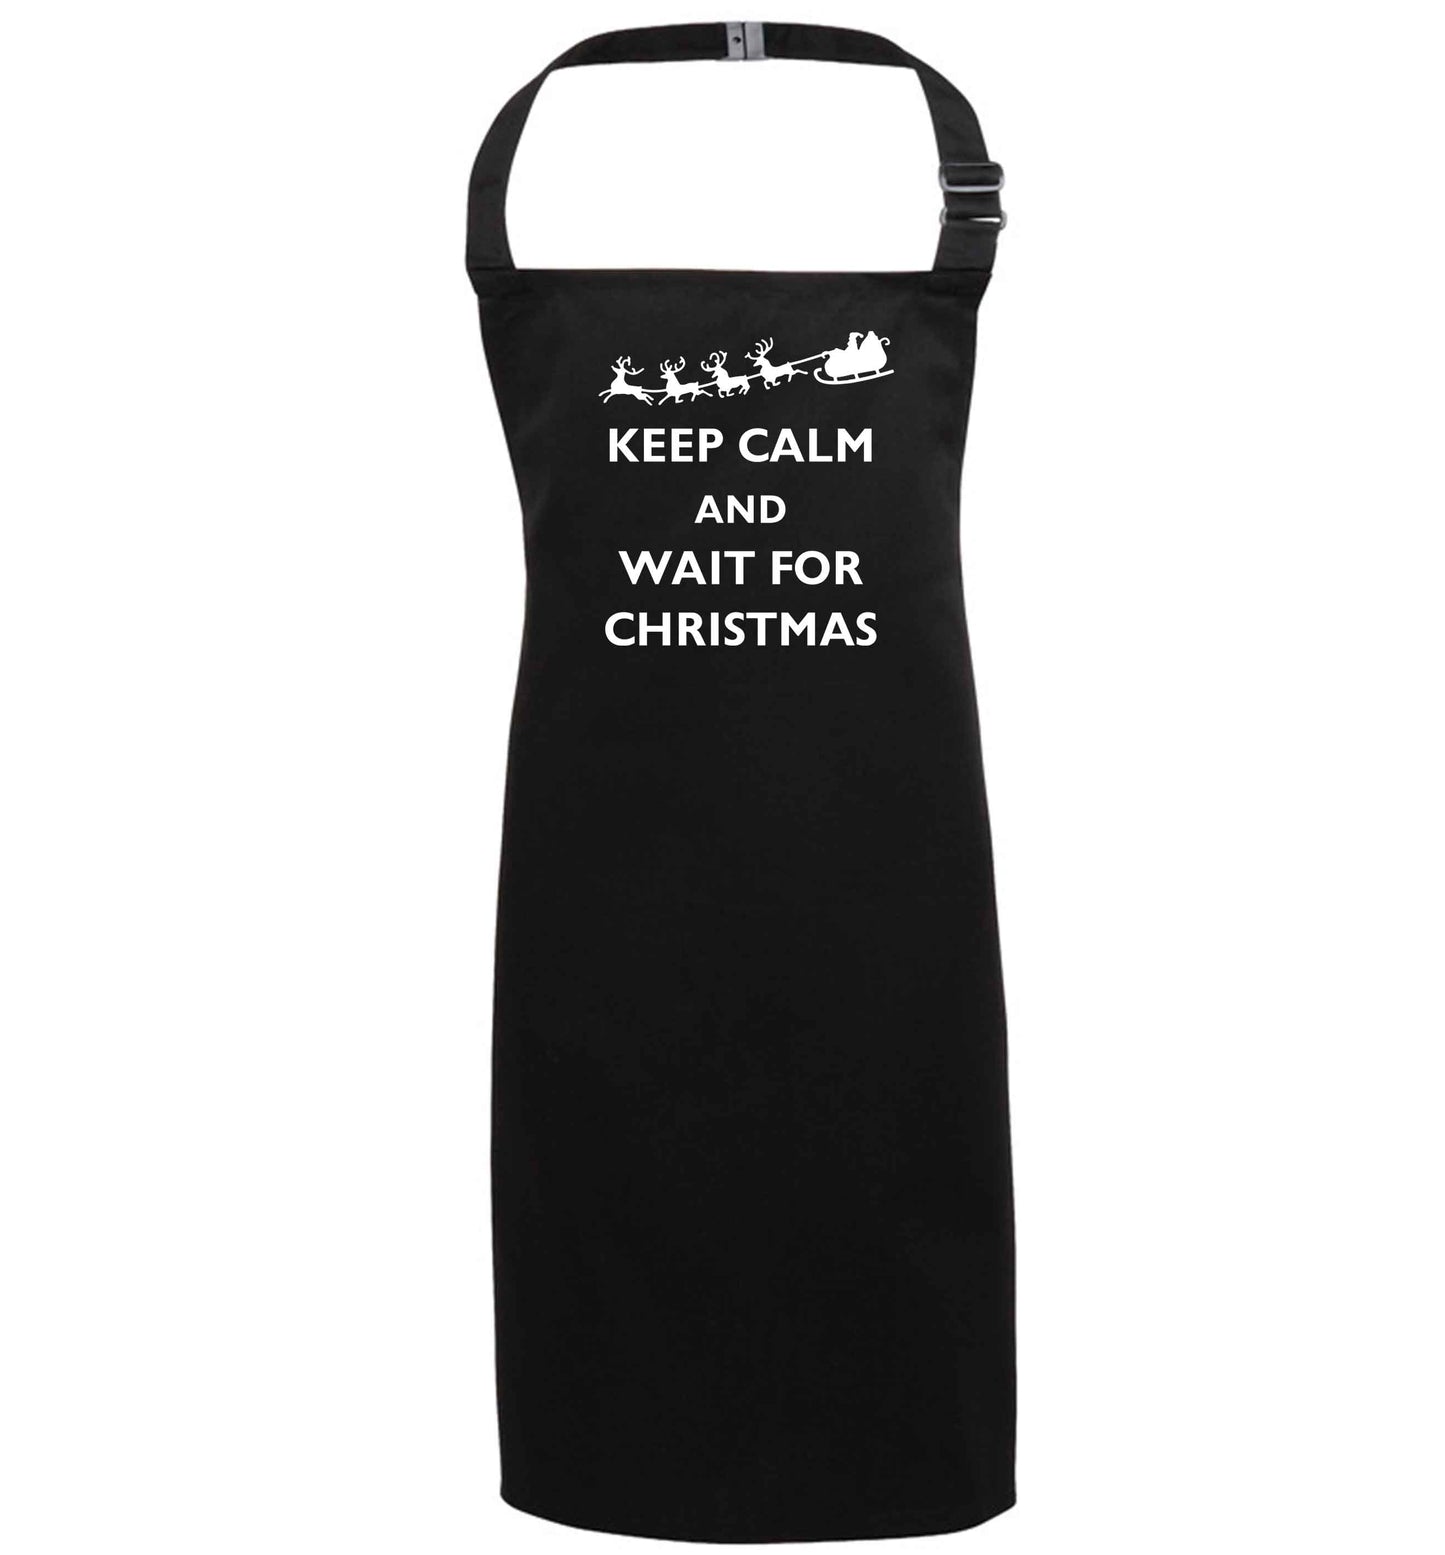 Keep calm and wait for Christmas black apron 7-10 years